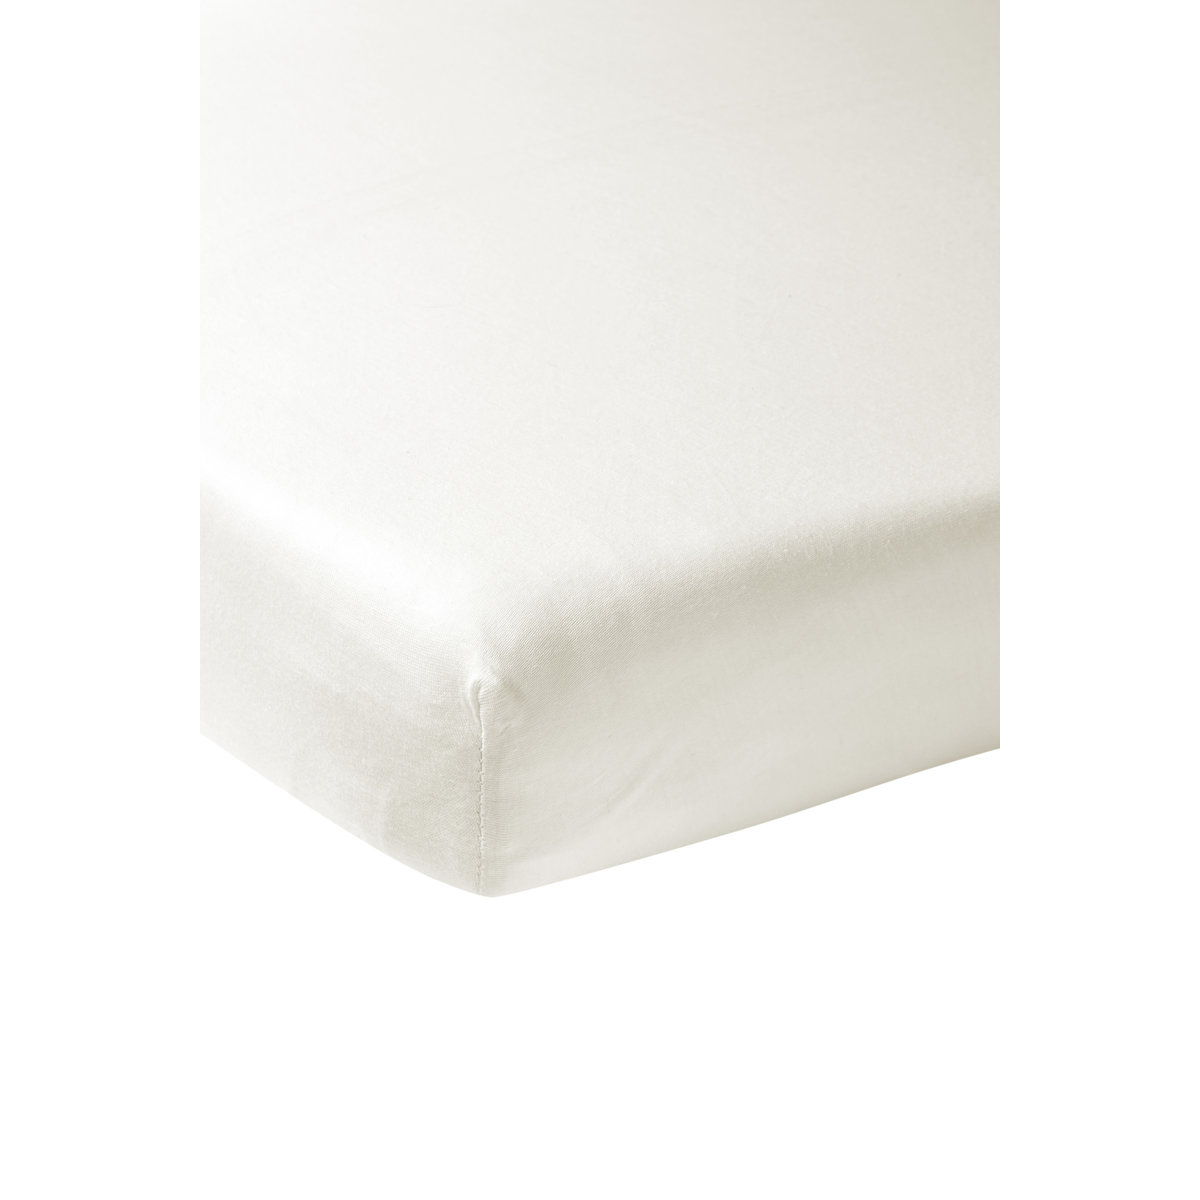 Order the Meyco Molton PU Waterproof Fitted Sheet online - Baby Plus